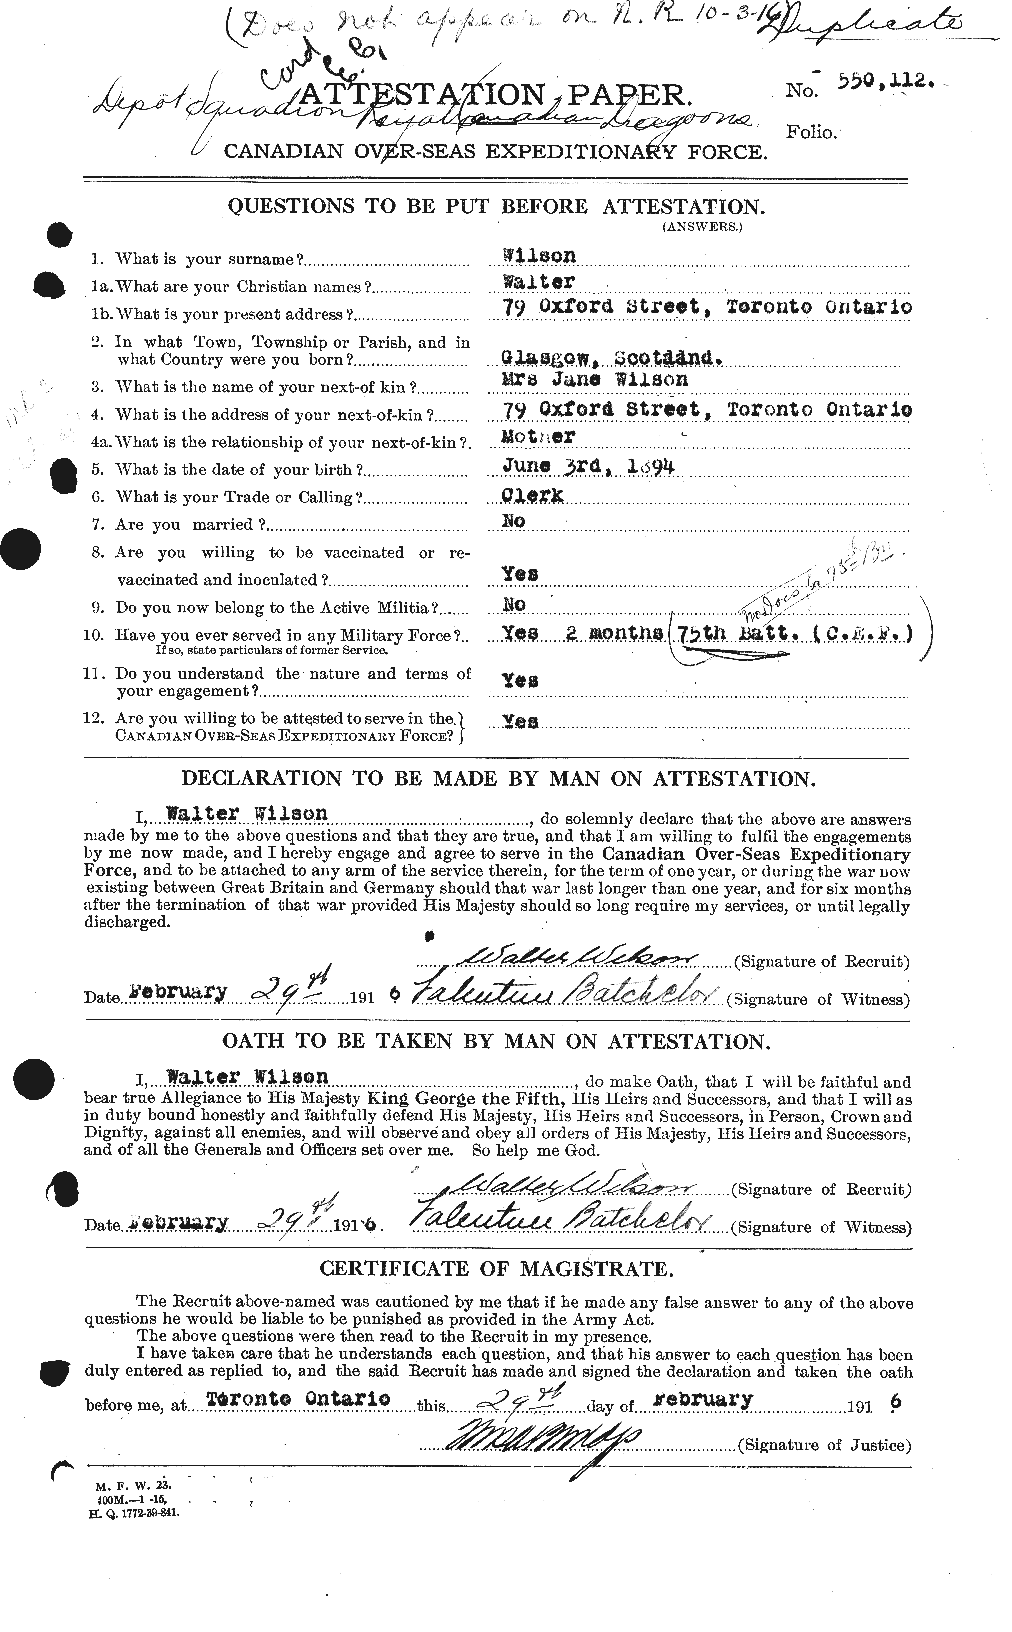 Personnel Records of the First World War - CEF 681742a